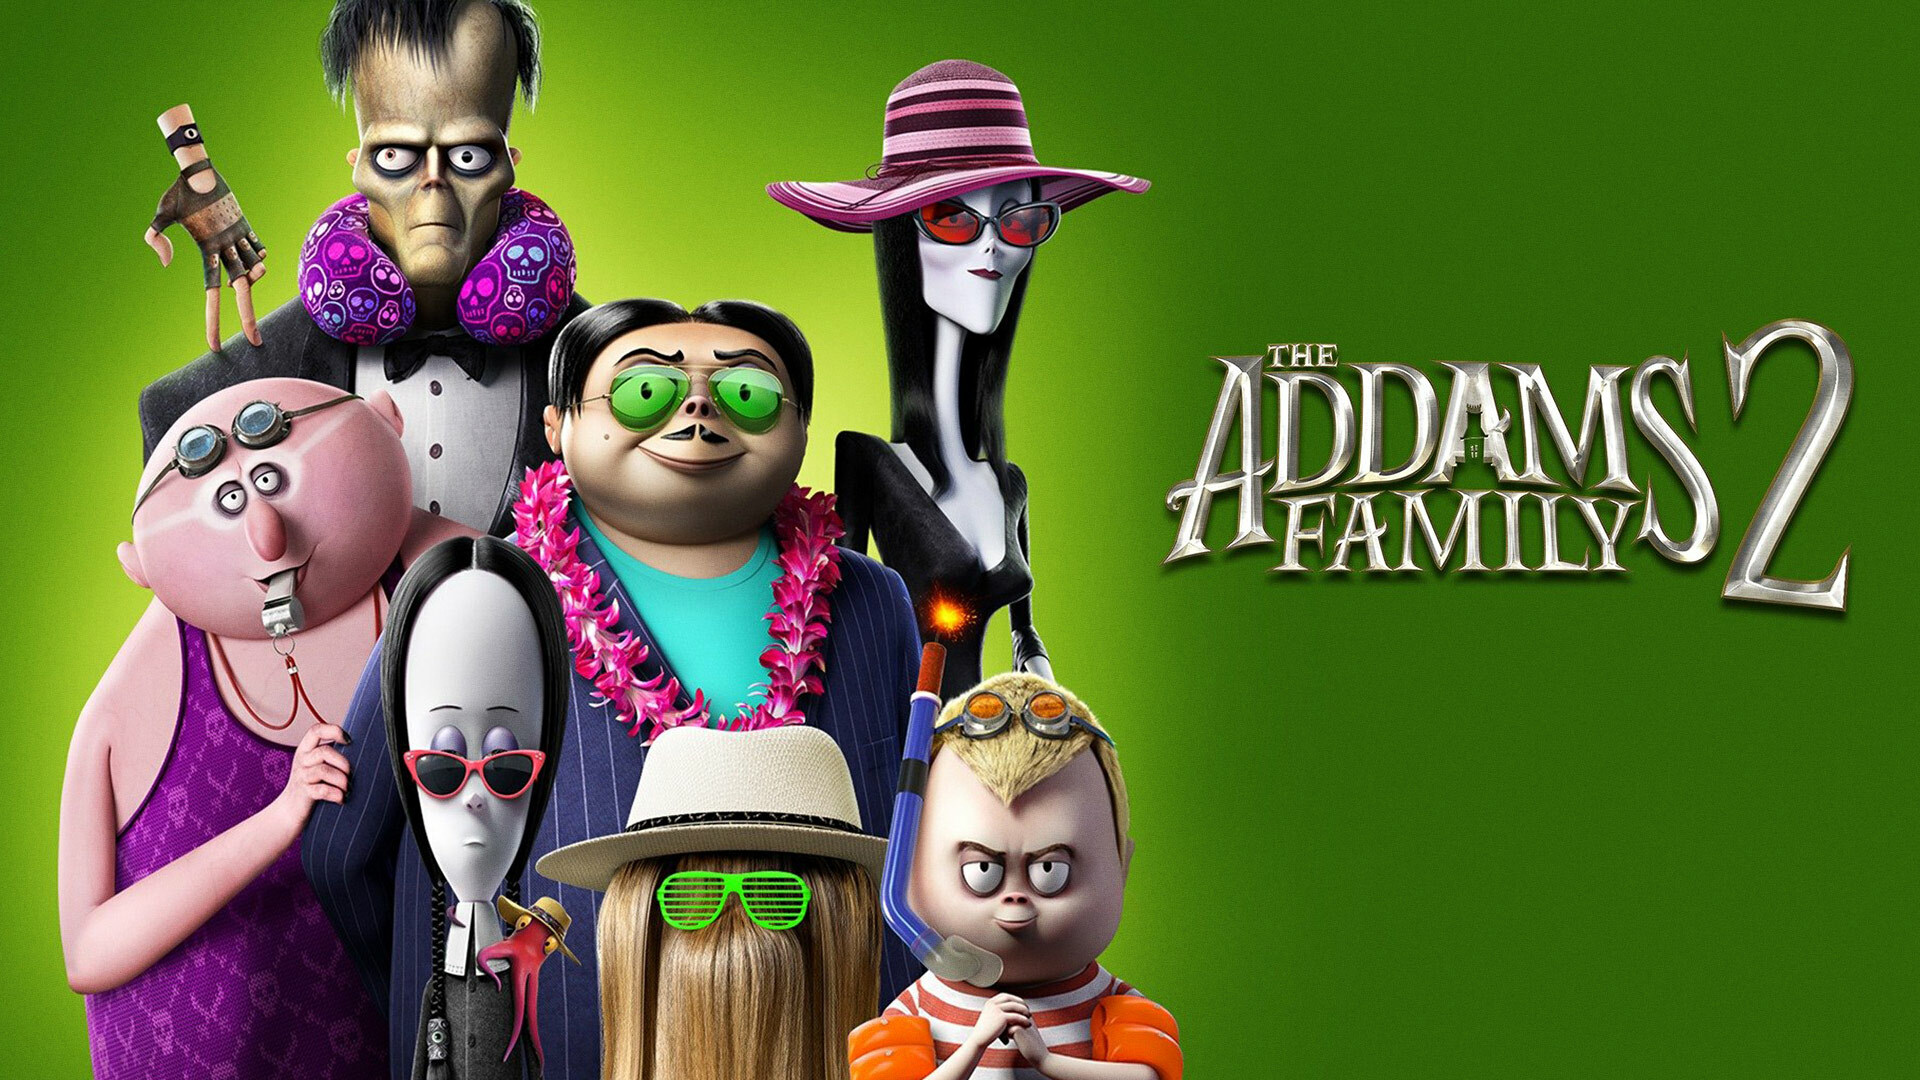 The Addams Family 2 - Watch Full Movie on Paramount Plus